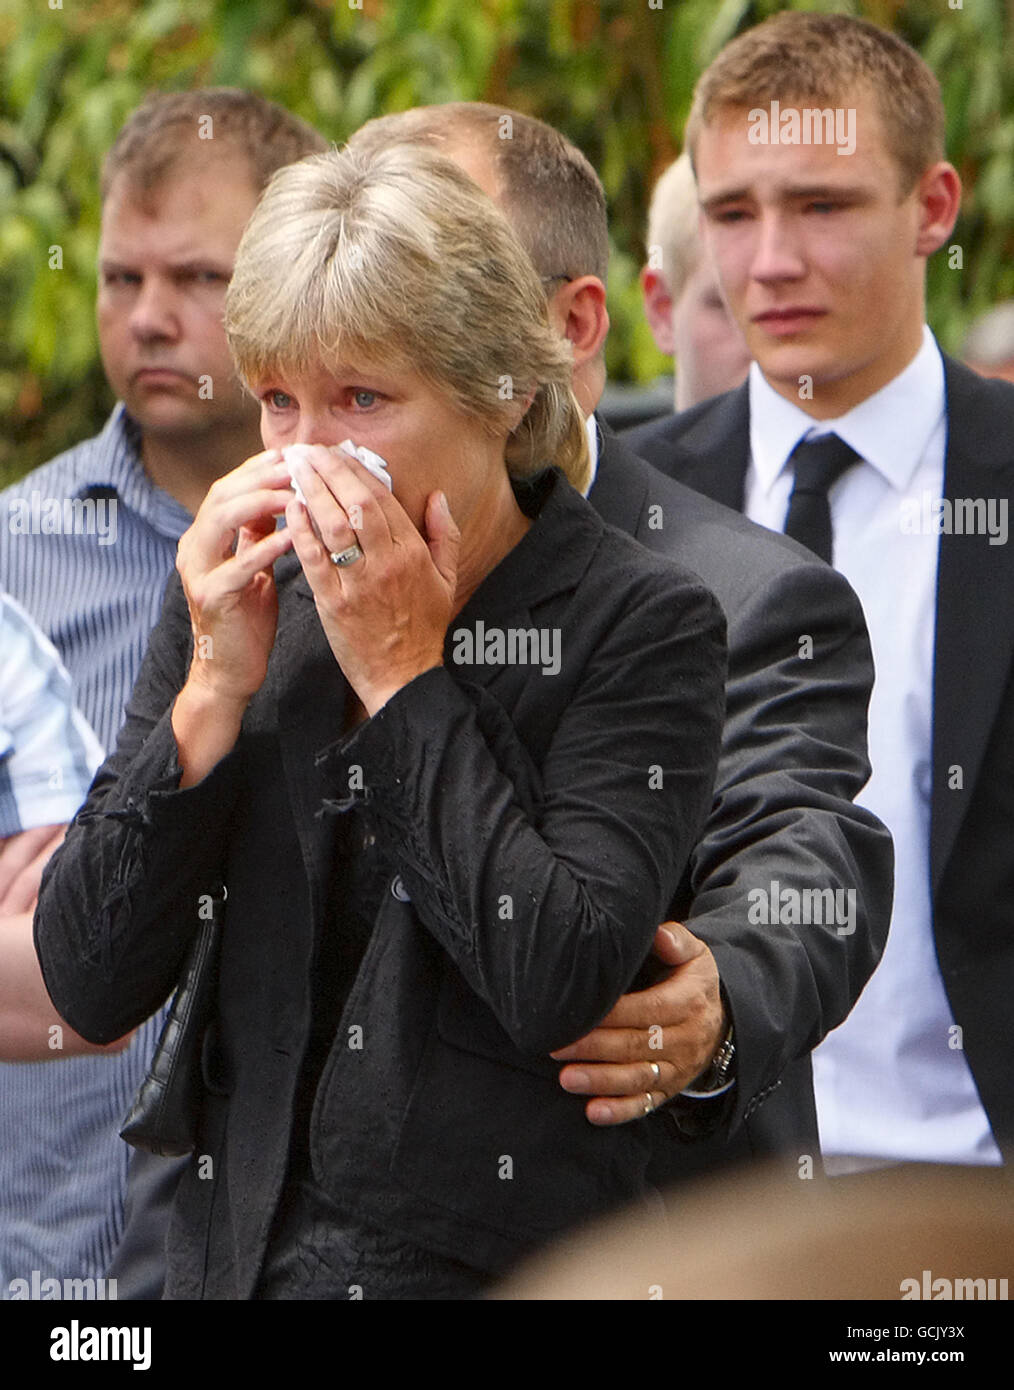 Parents Jenny and Robin (obscured) Hollington with sons Nick (not in frame) and Charlie (right) at the funeral of their eldest son, Royal Marine Richard Hollington in the village of Steep in Hampshire. The 23 year old was the 300th soldier to die in the Afghanistan conflict. He passed away on Father's Day at Queen Elizabeth Hospital in Birmingham, eight days after being wounded on patrol in Sangin Province while serving with 40 Commando. Stock Photo